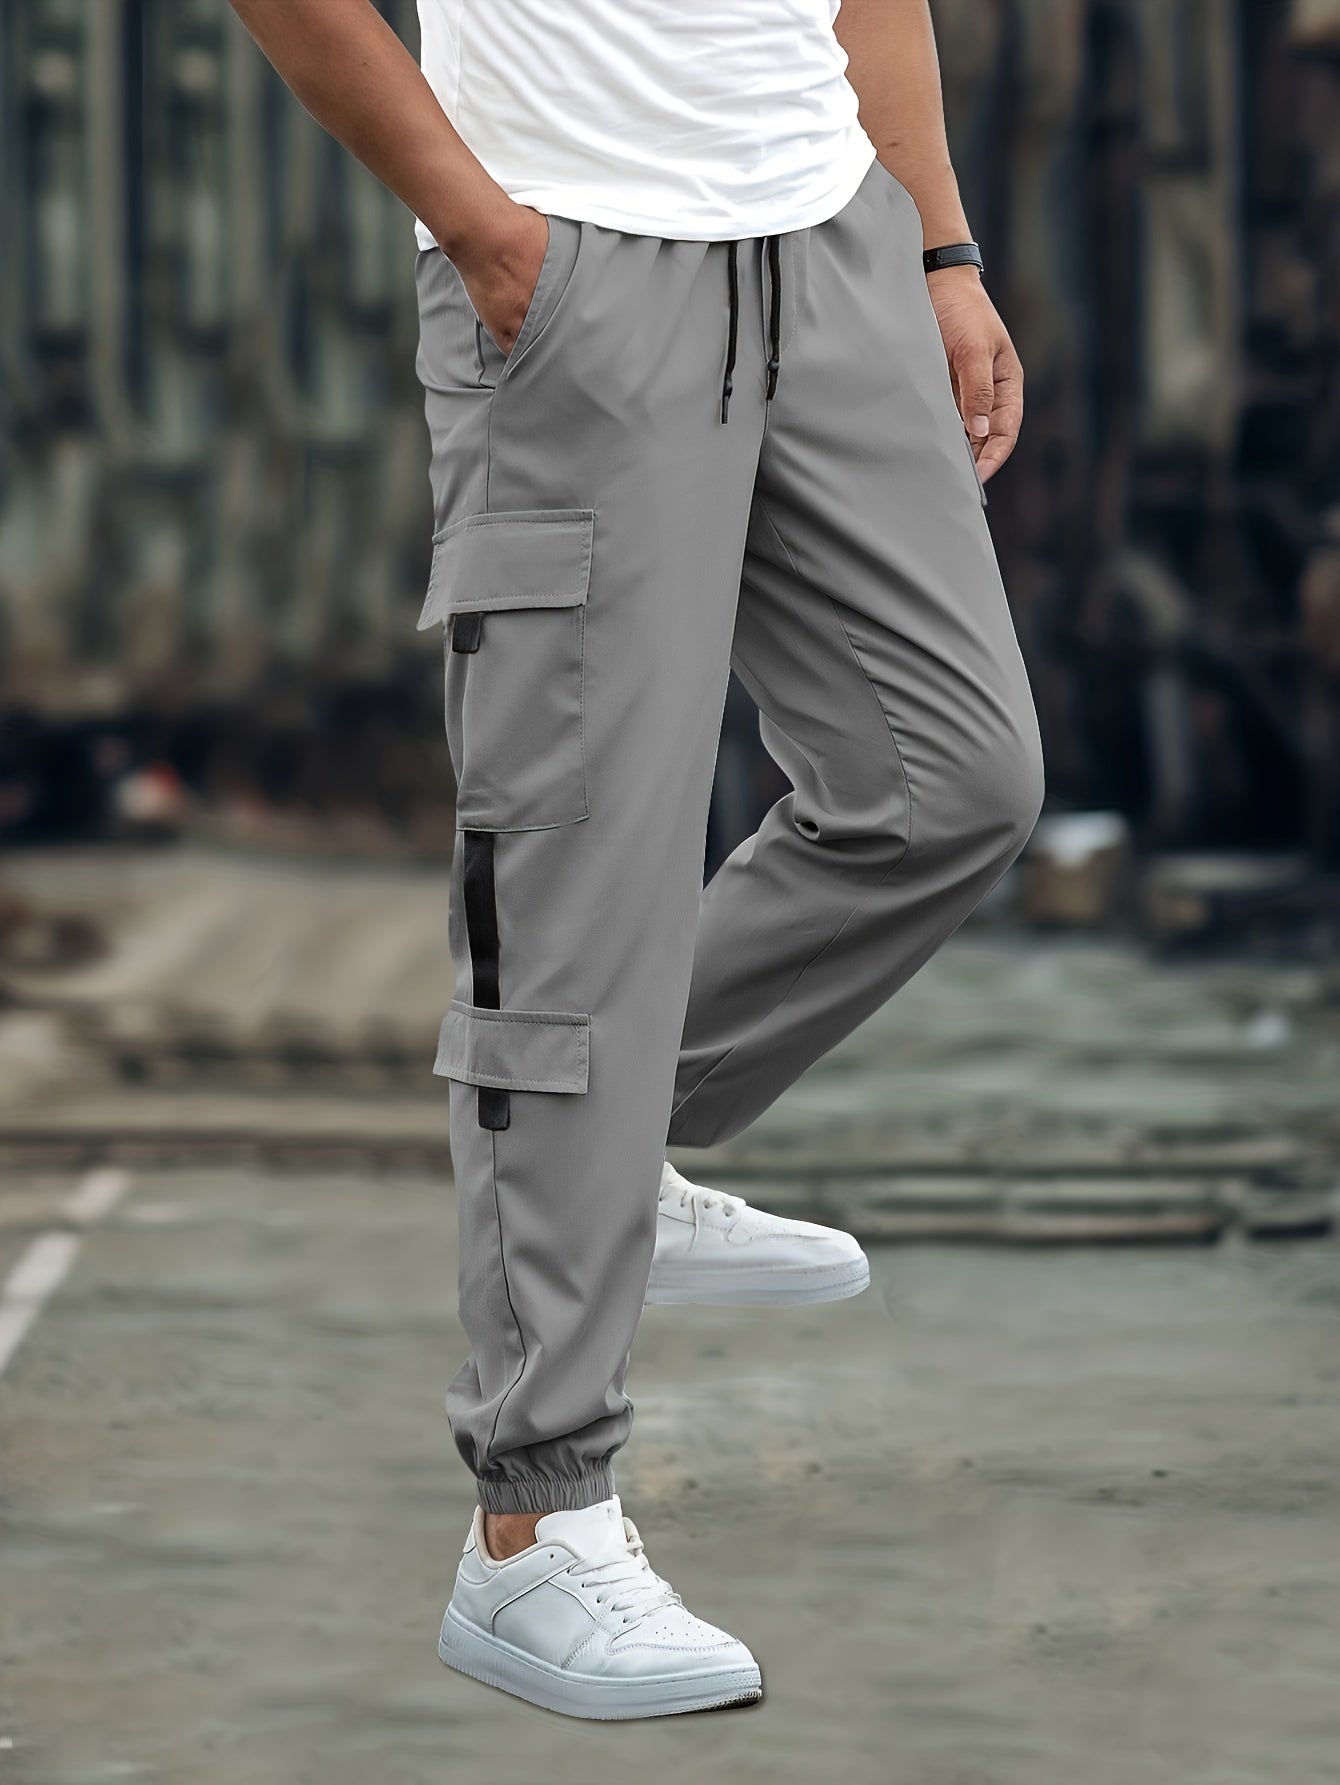 Multi Flap Pockets Cargo Pants, Men's Casual Loose Fit Drawstring Solid Color With Side Black Straps Design Cargo Pants Joggers For Spring Summer Outdoor